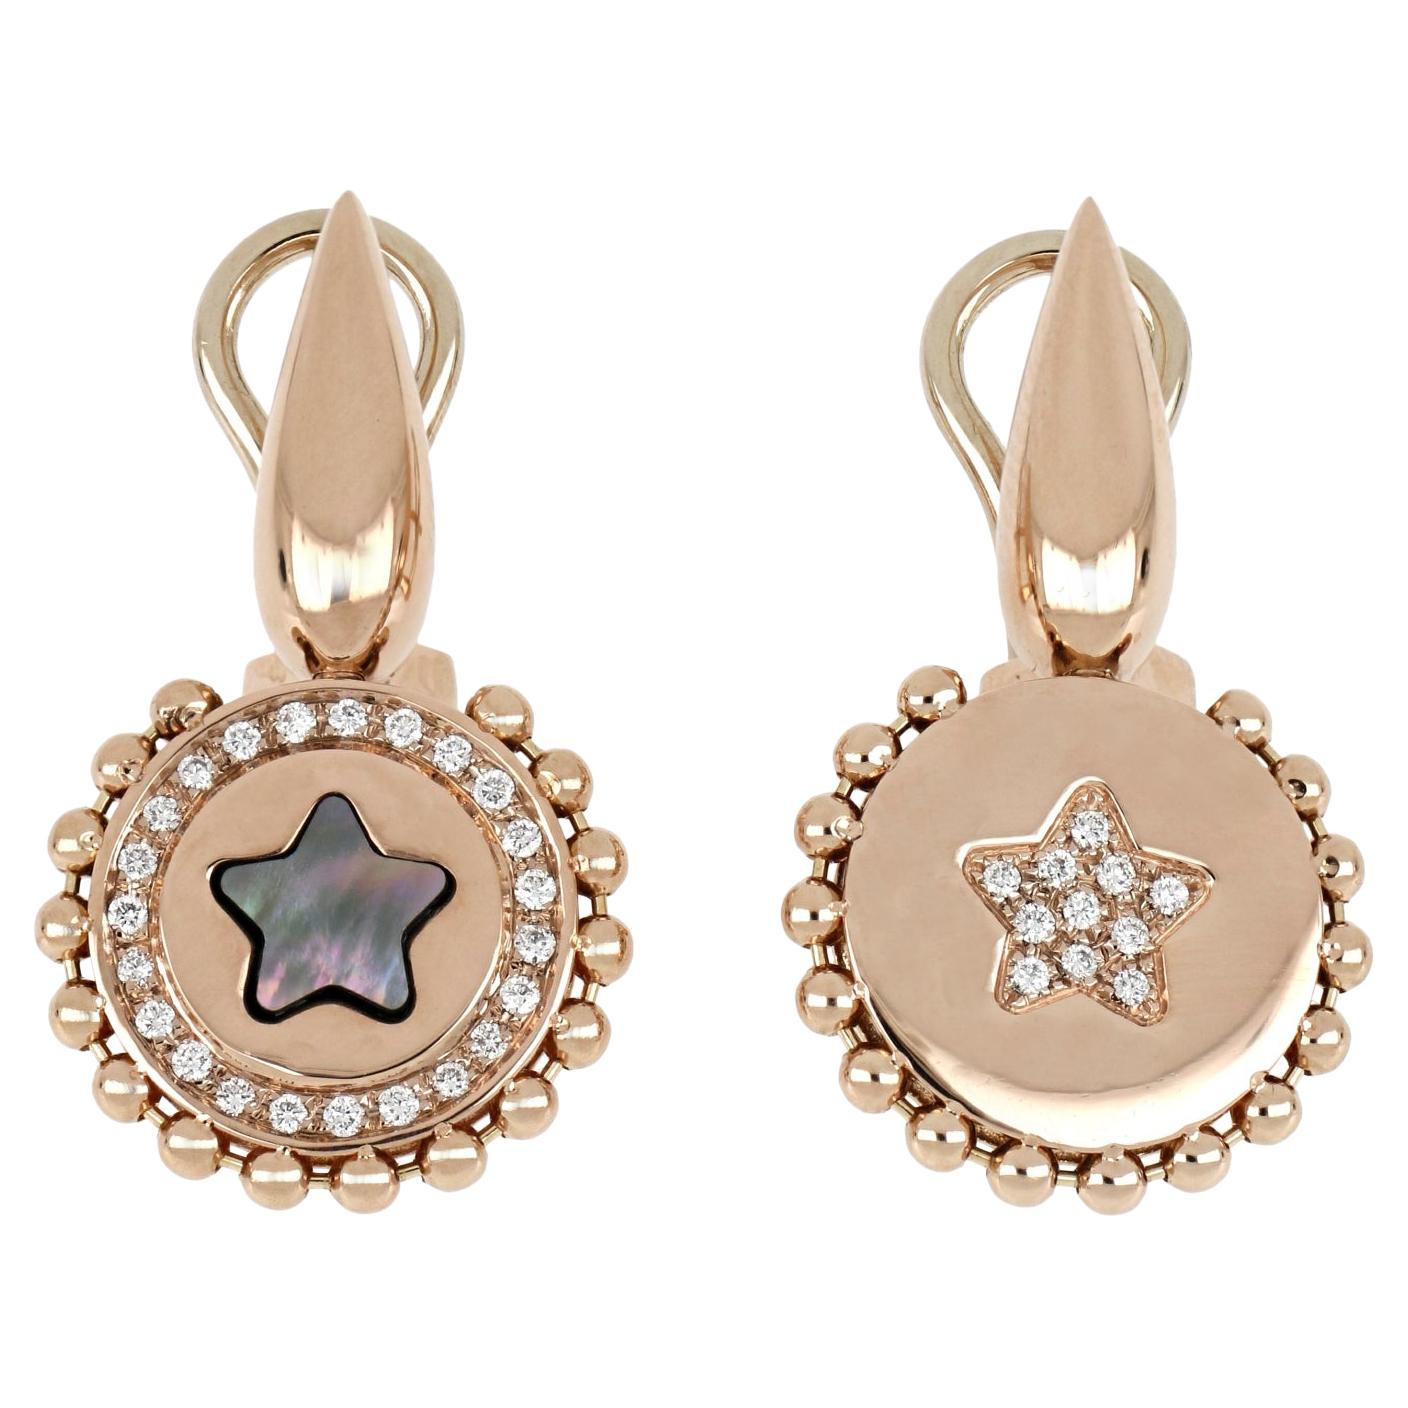 18kt Rose Gold Reverse Earrings "Star" With Diamonds and Mother-of-Pearl Insert For Sale